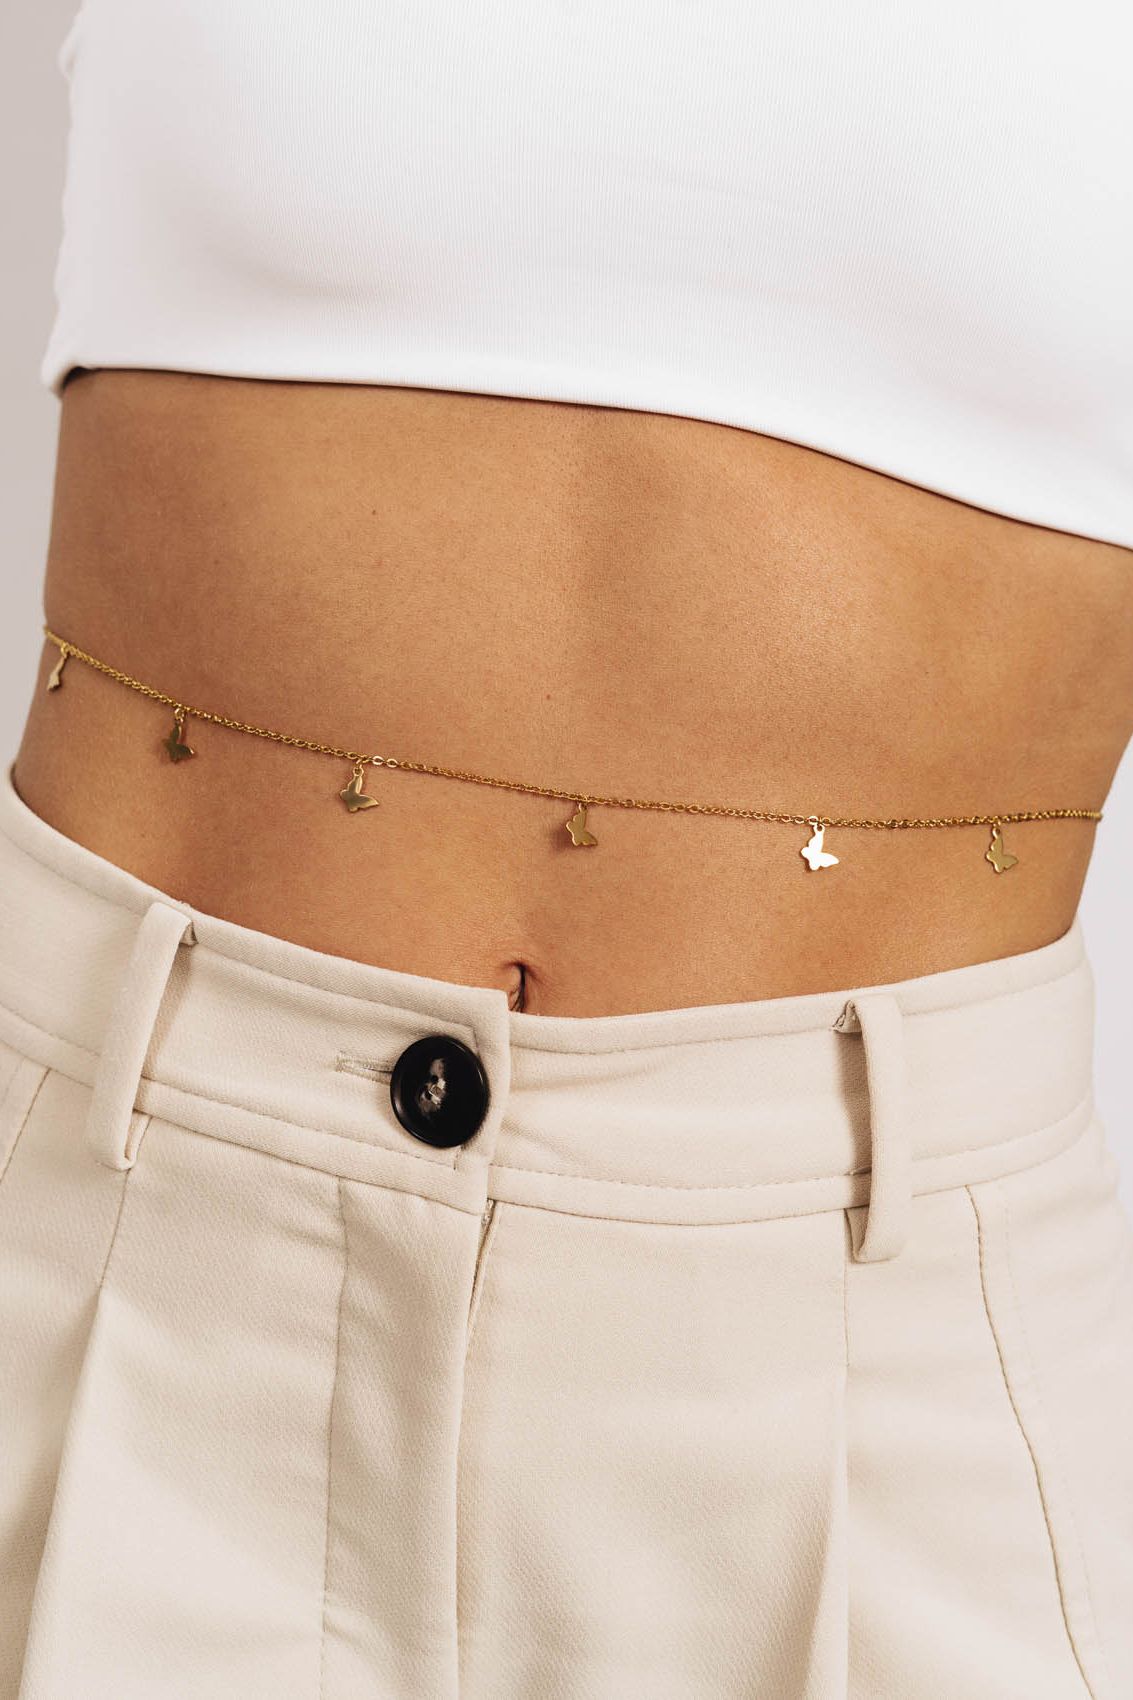 Butterfly Belly Chain